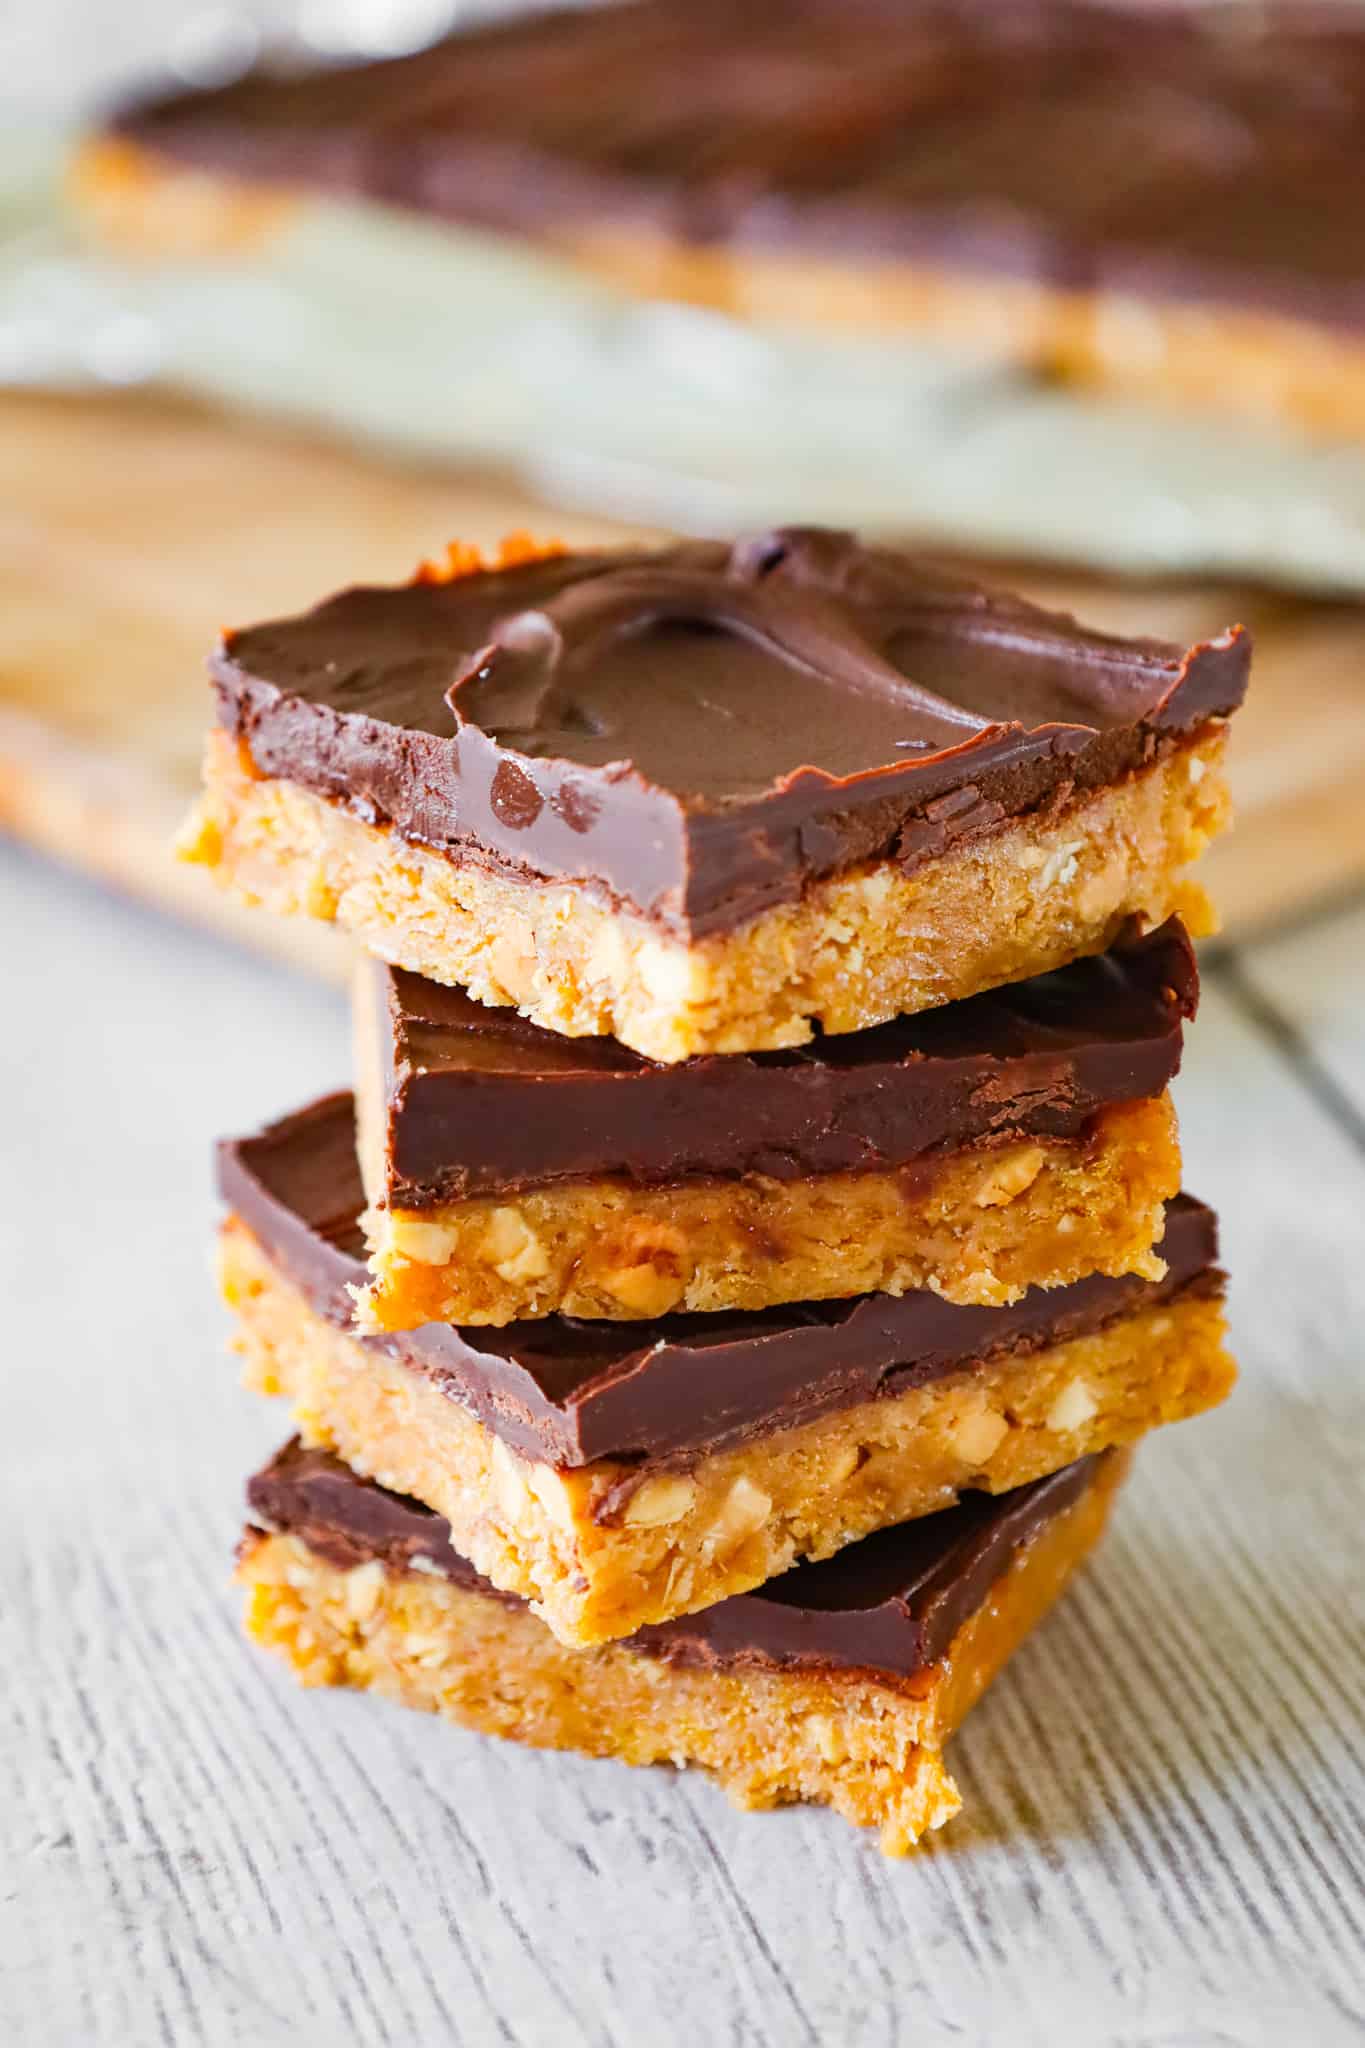 Peanut Butter Cornflake Bars are a decadent chocolate peanut butter dessert recipe made with corn syrup, crunchy peanut butter, crumbled cornflakes cereal and semi sweet chocolate chips.